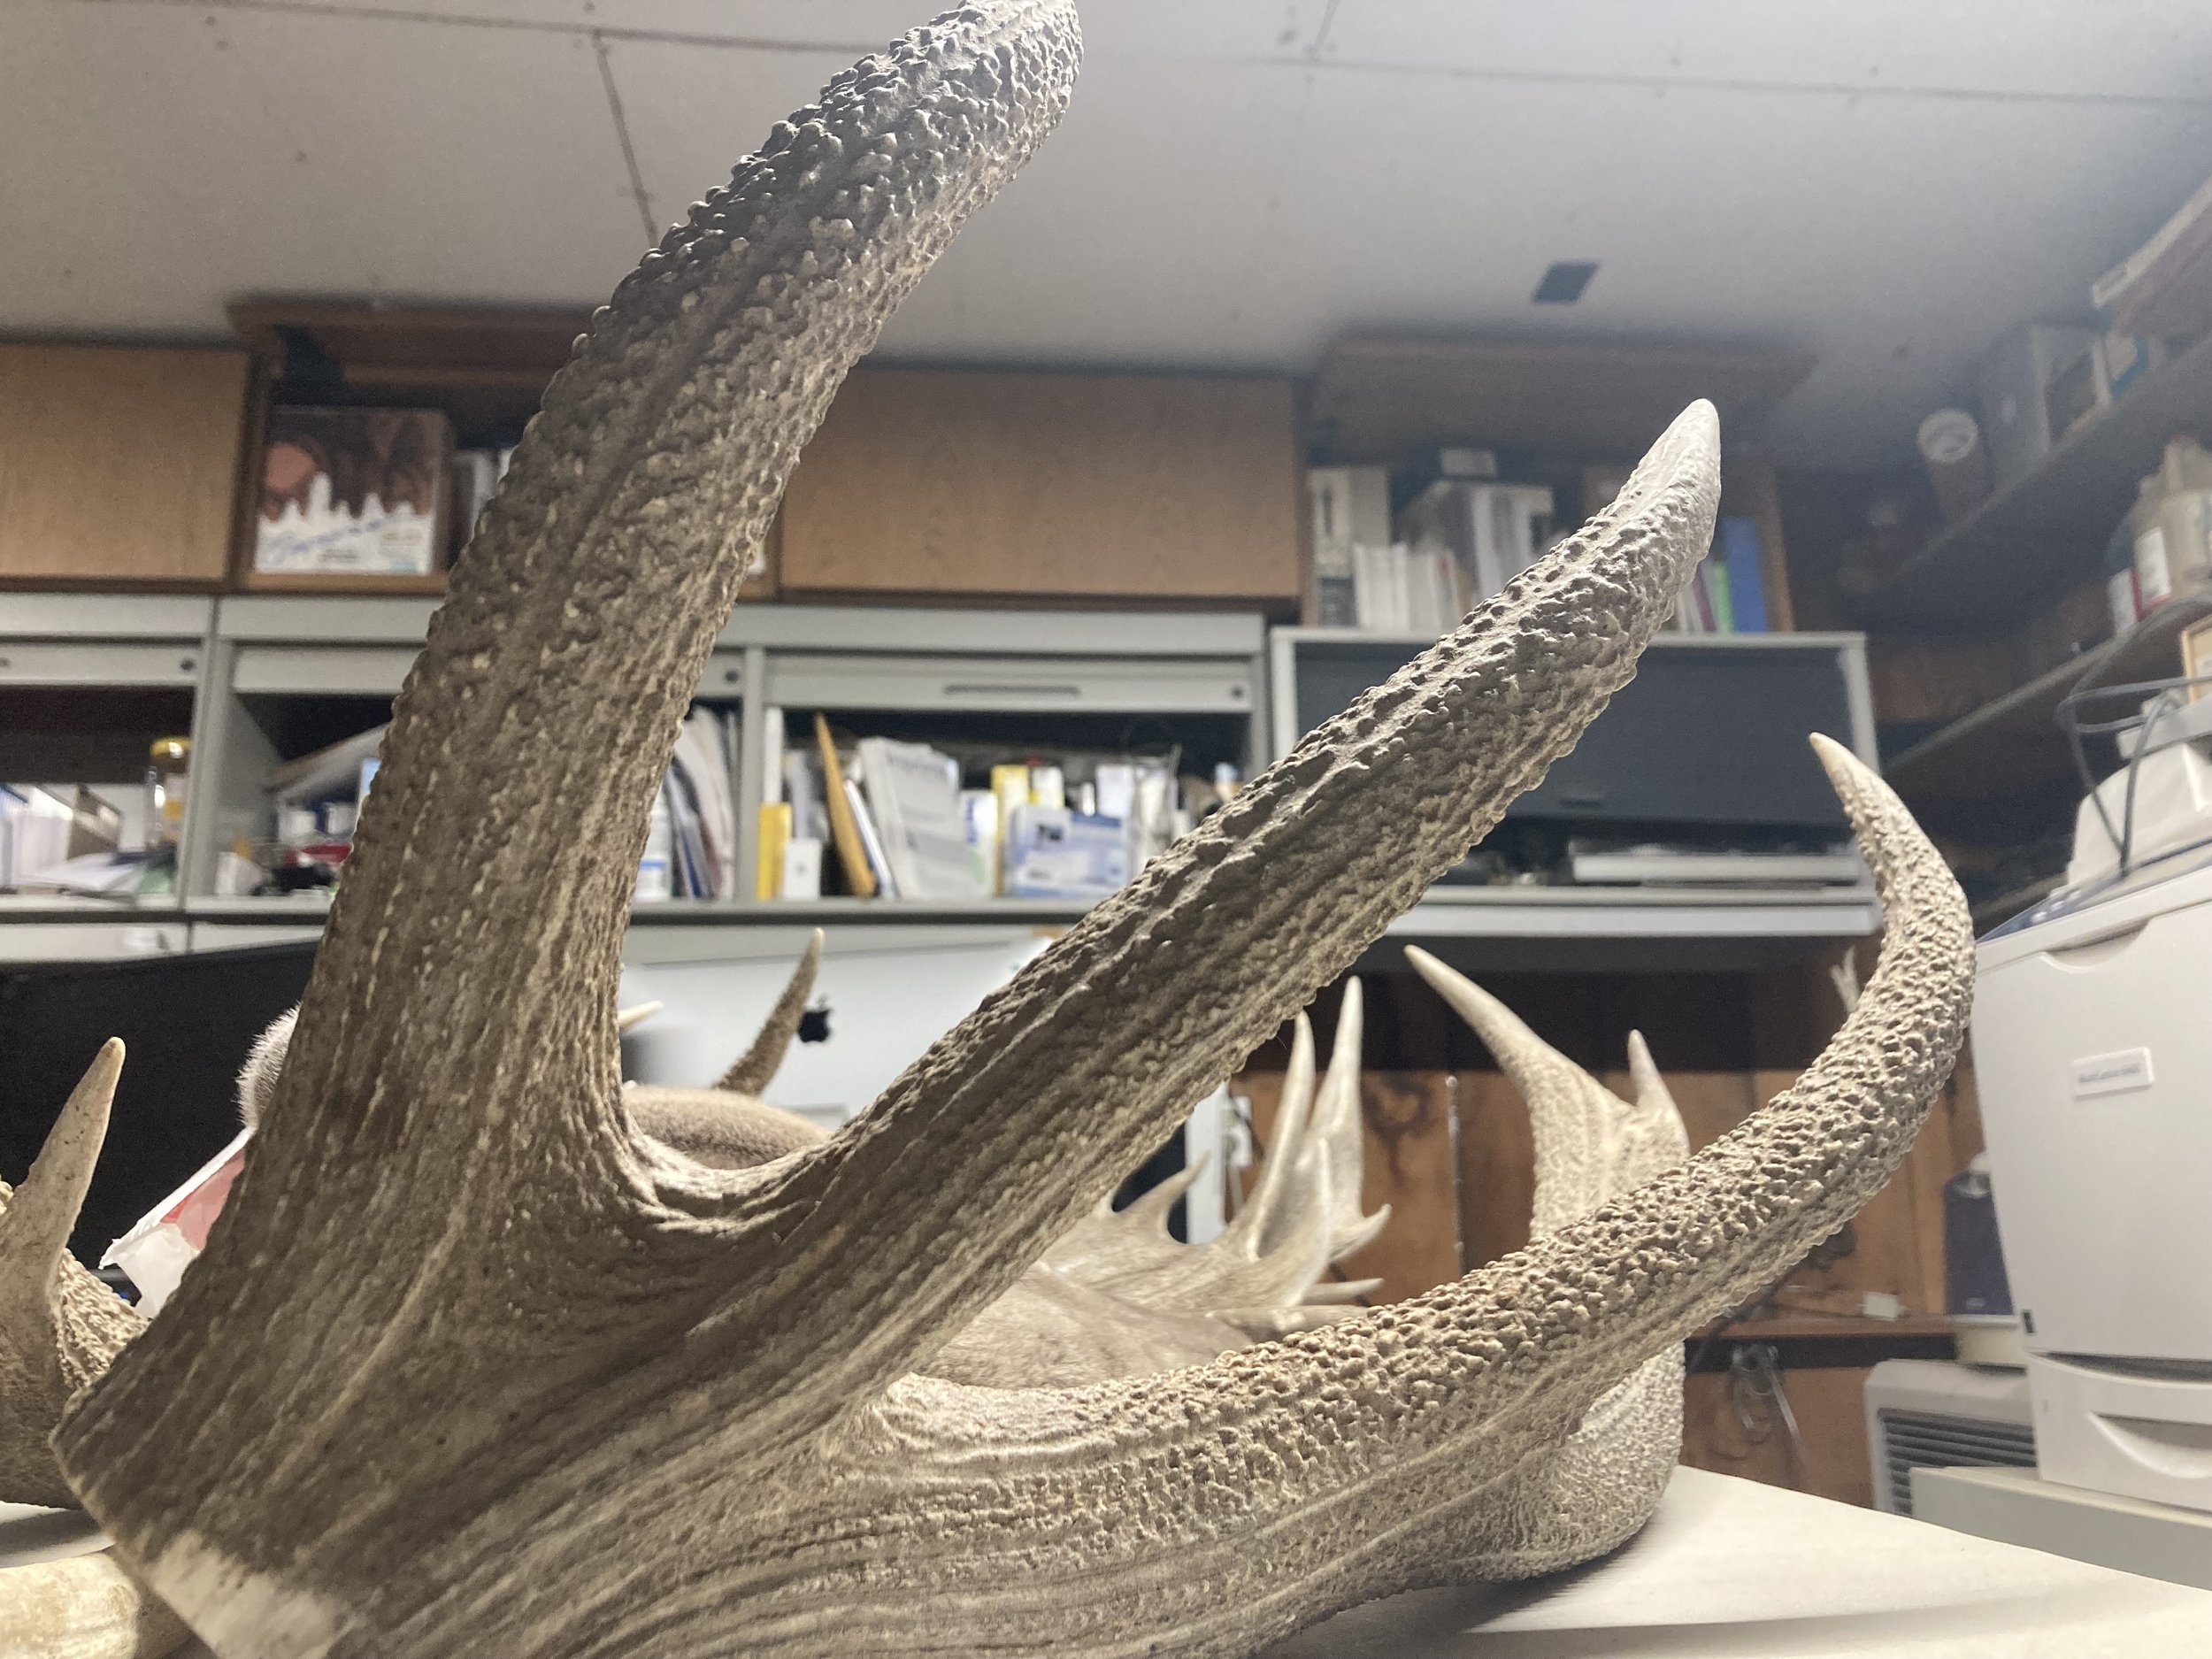  A red deer shed antler. Credit: Taylor Quimby 